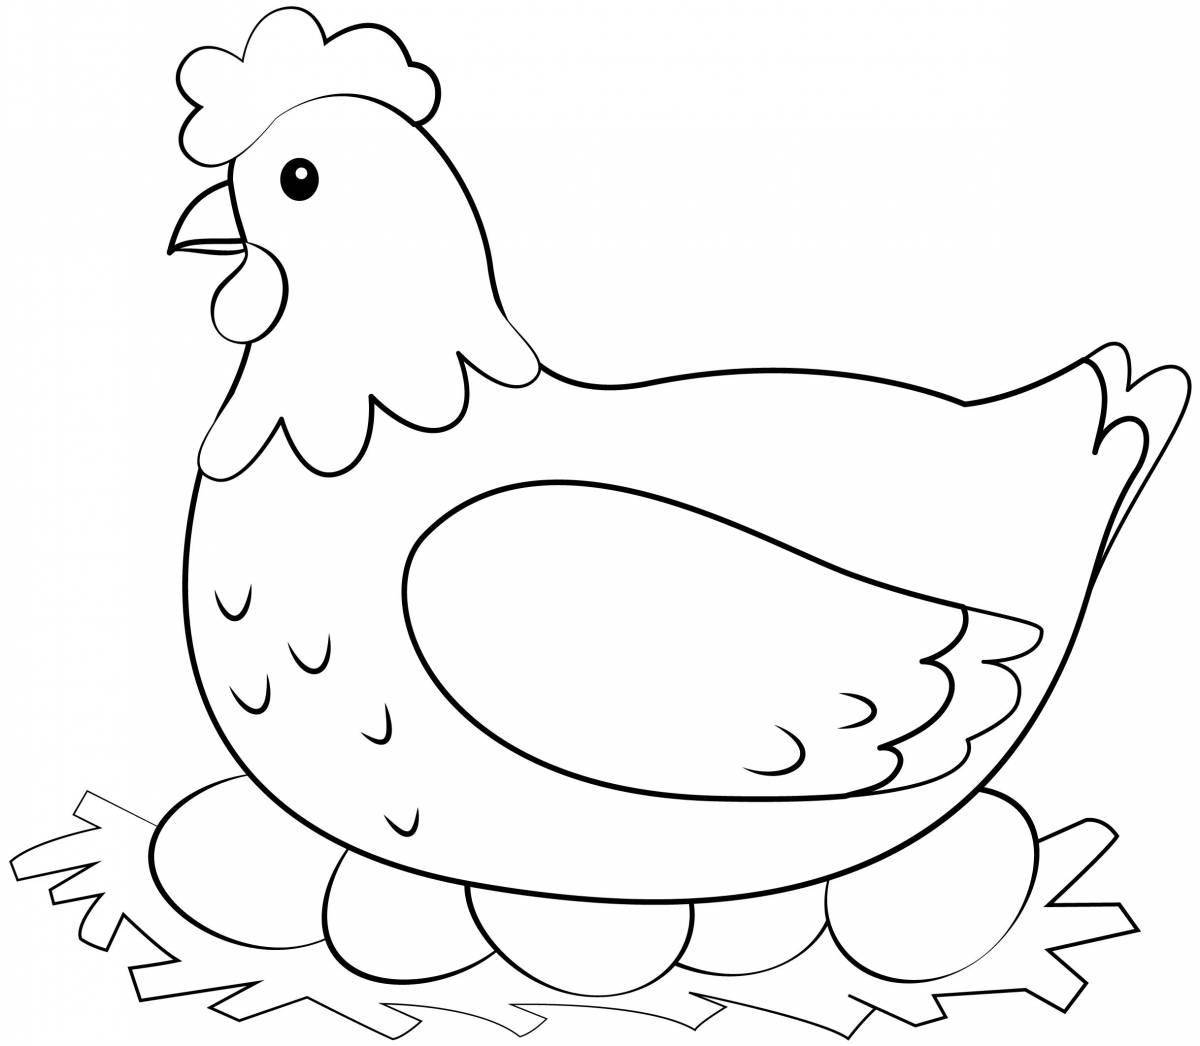 Chicken coloring book for kids 2-3 years old